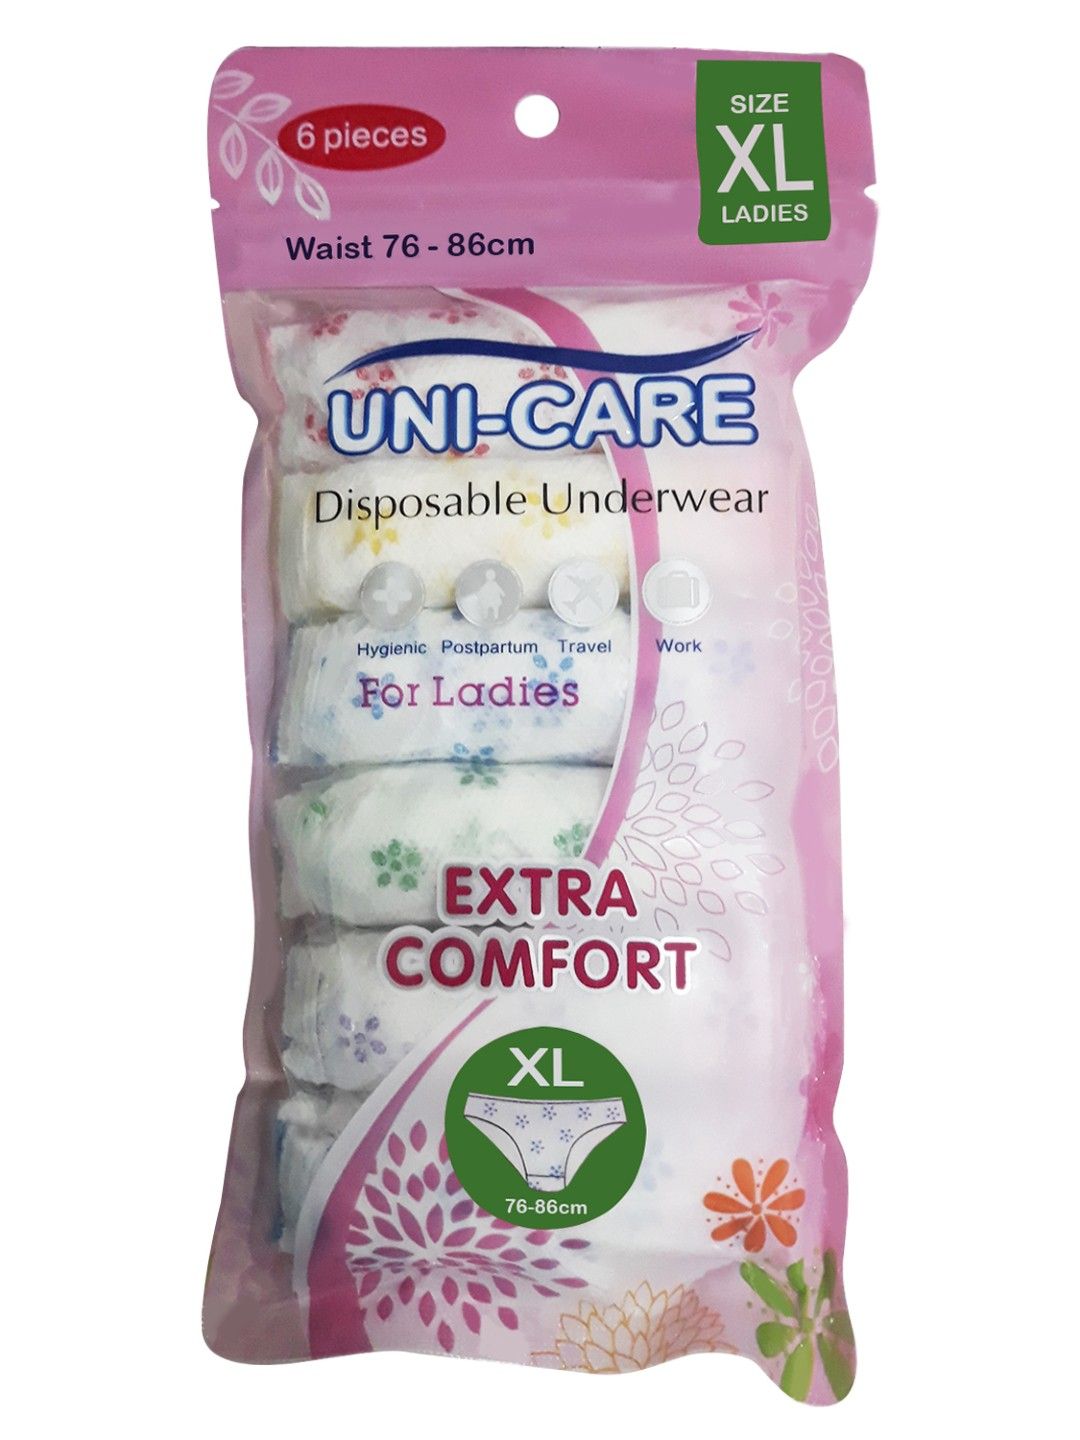 Uni-care Disposable Underwear for Women Extra Large 76-86cm (6s